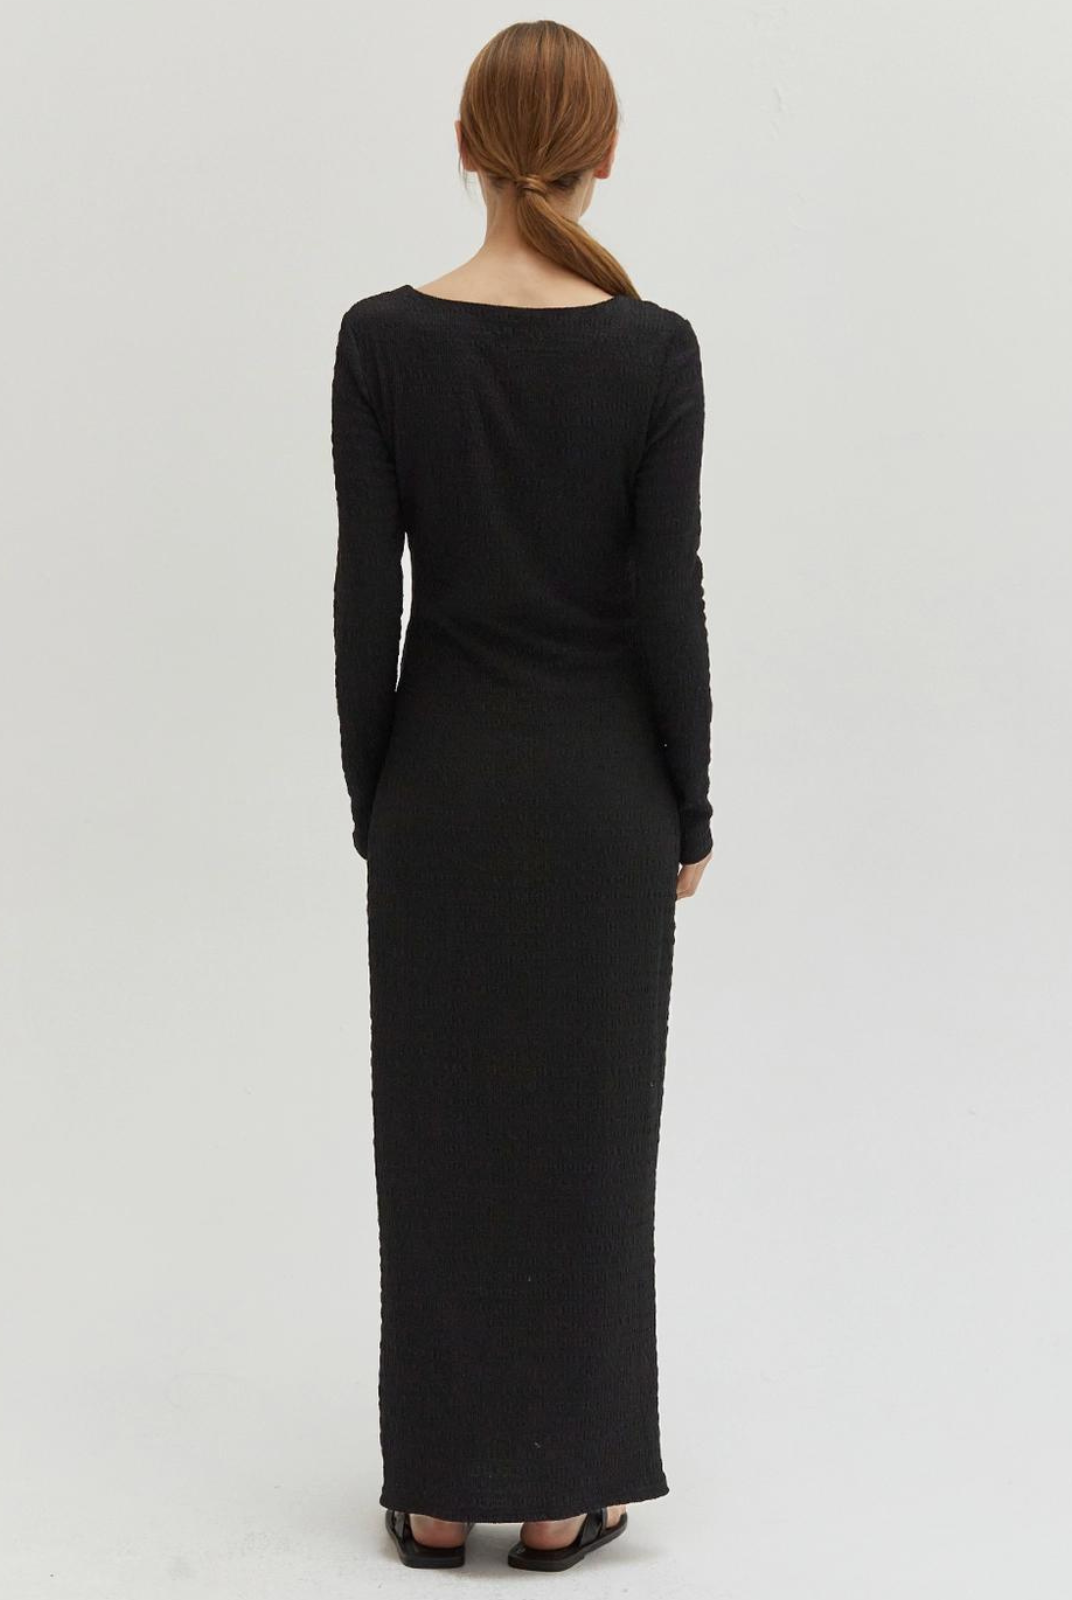 Irene Square Neck Textured Maxi Dress. A square neck maxi dress with an open side slit.